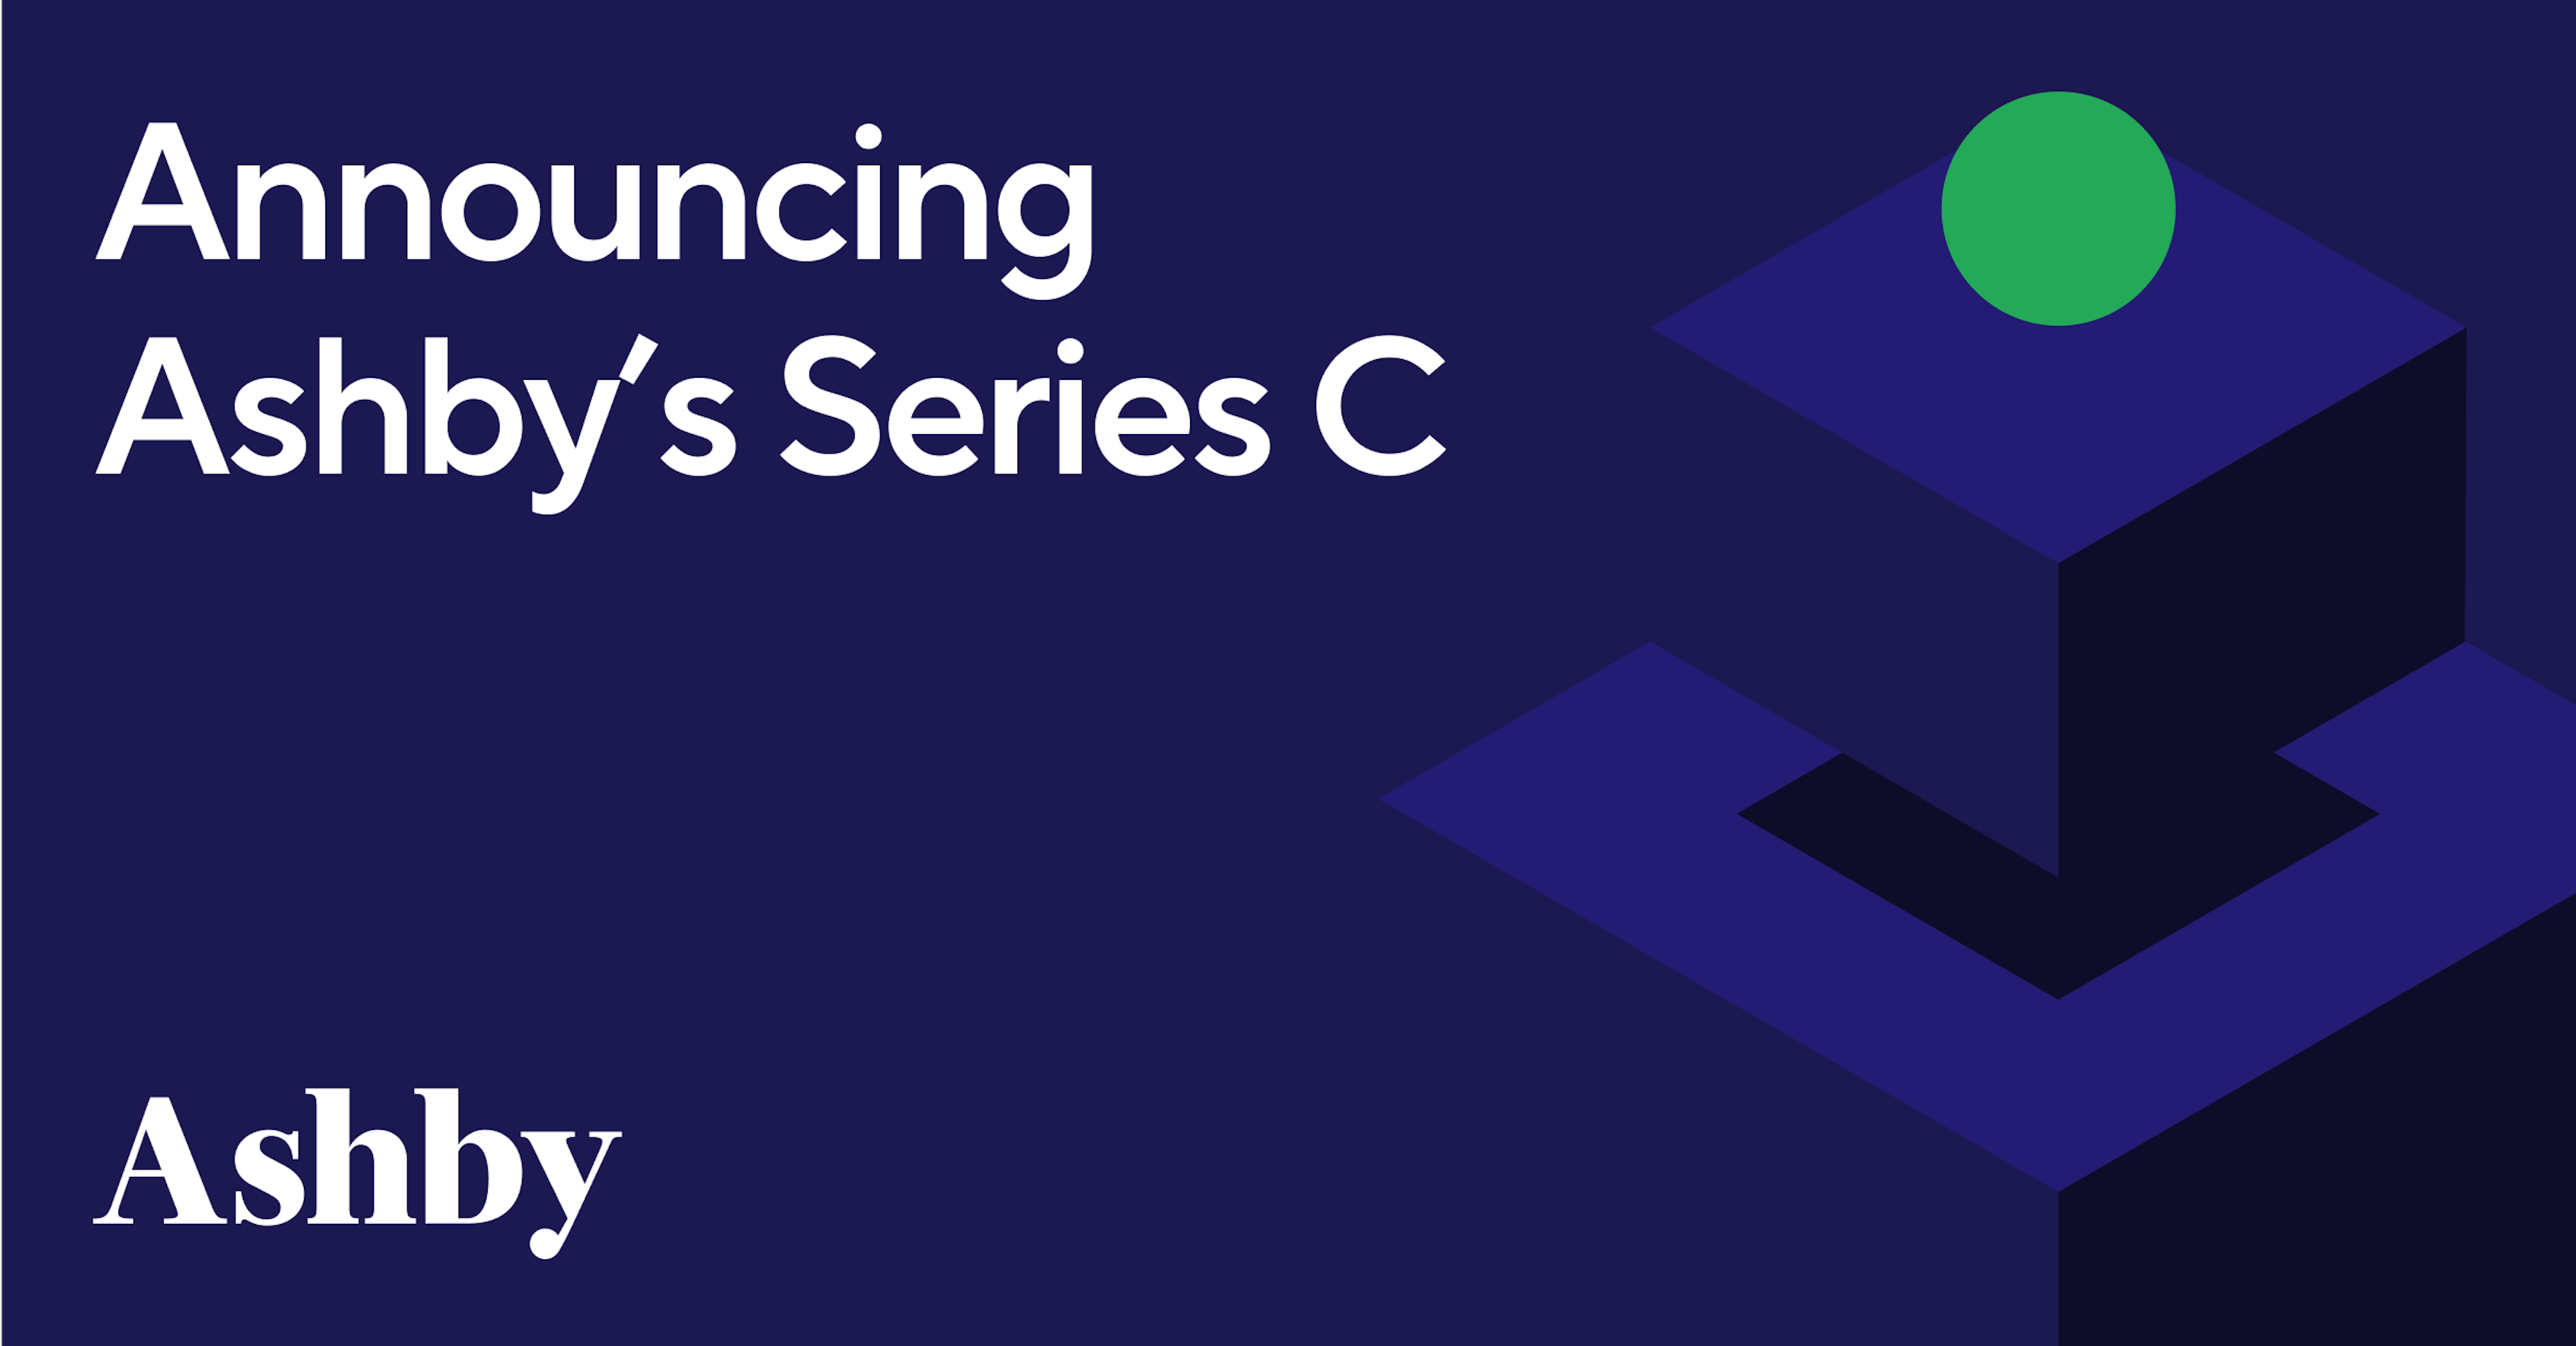 Announcing Ashby’s $30M Series C - Doing More of What We Already Do, Just Faster and Better